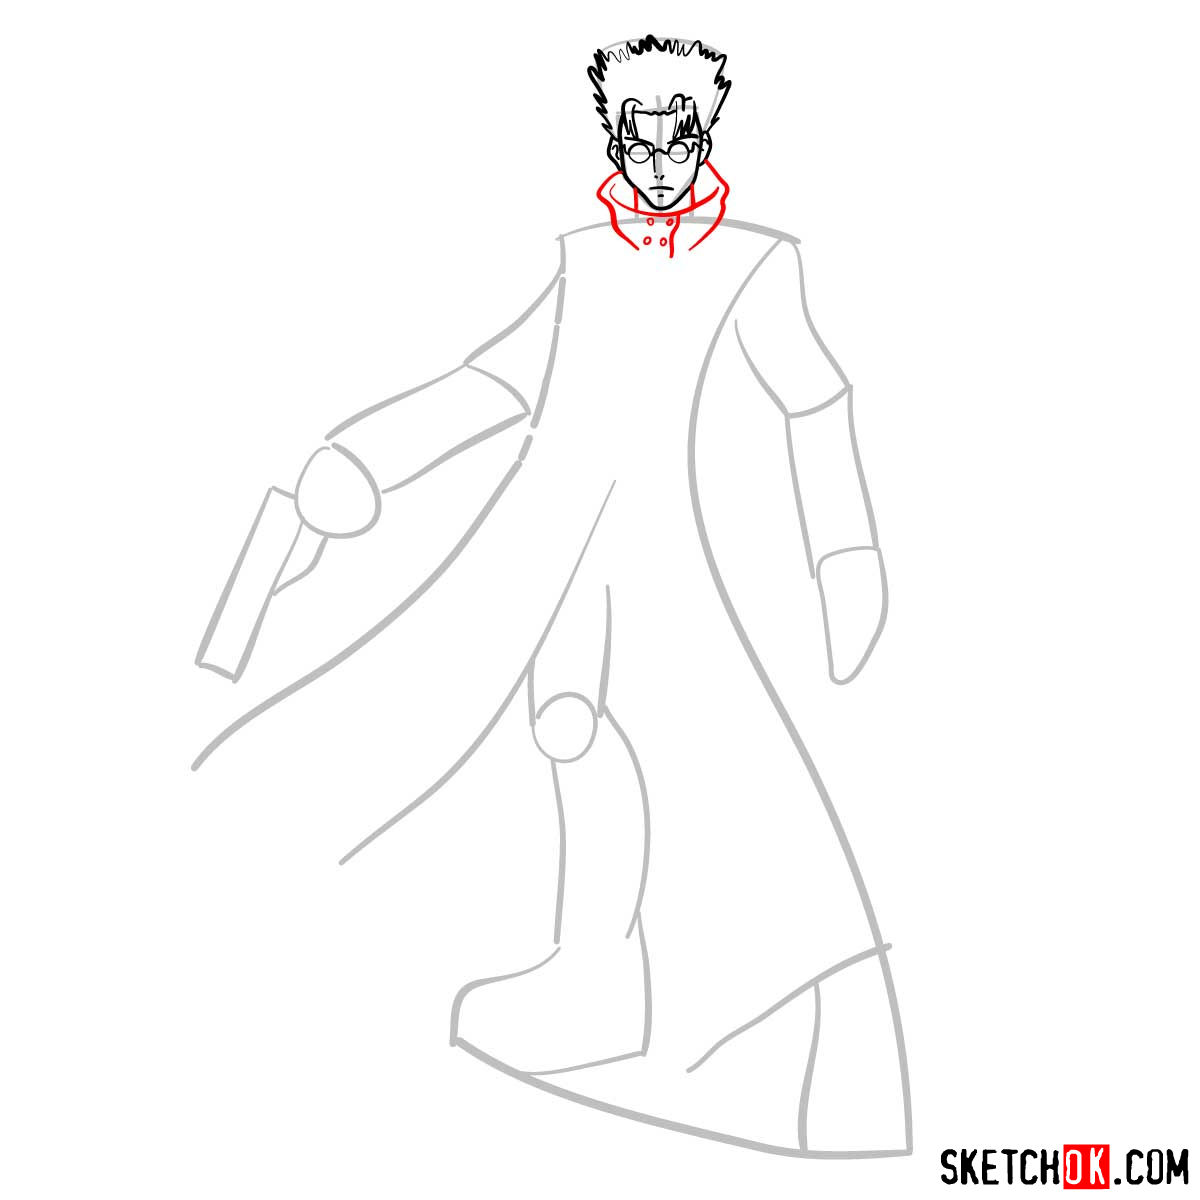 How to draw Vash the Stampede from Trigun anime - step 06